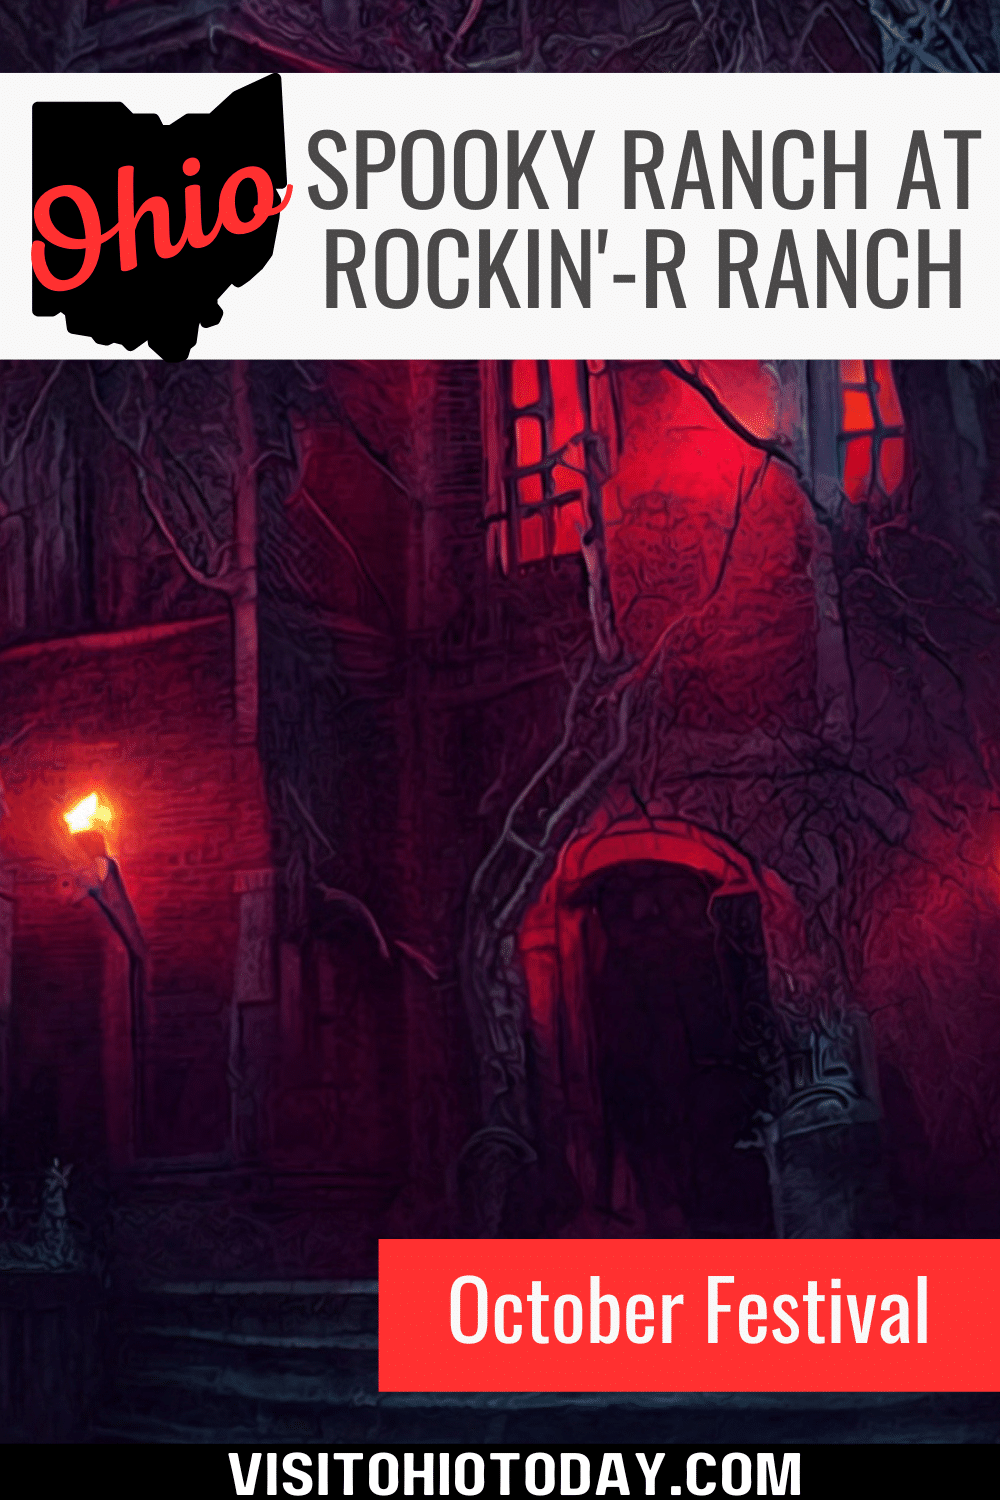 Spooky Ranch at Rockin’-R Ranch is probably about the scariest of all the Halloween events in Ohio! Held in Columbia Station, Cleveland, this event takes place over seven weekends from September 22 to October 31, 2023.